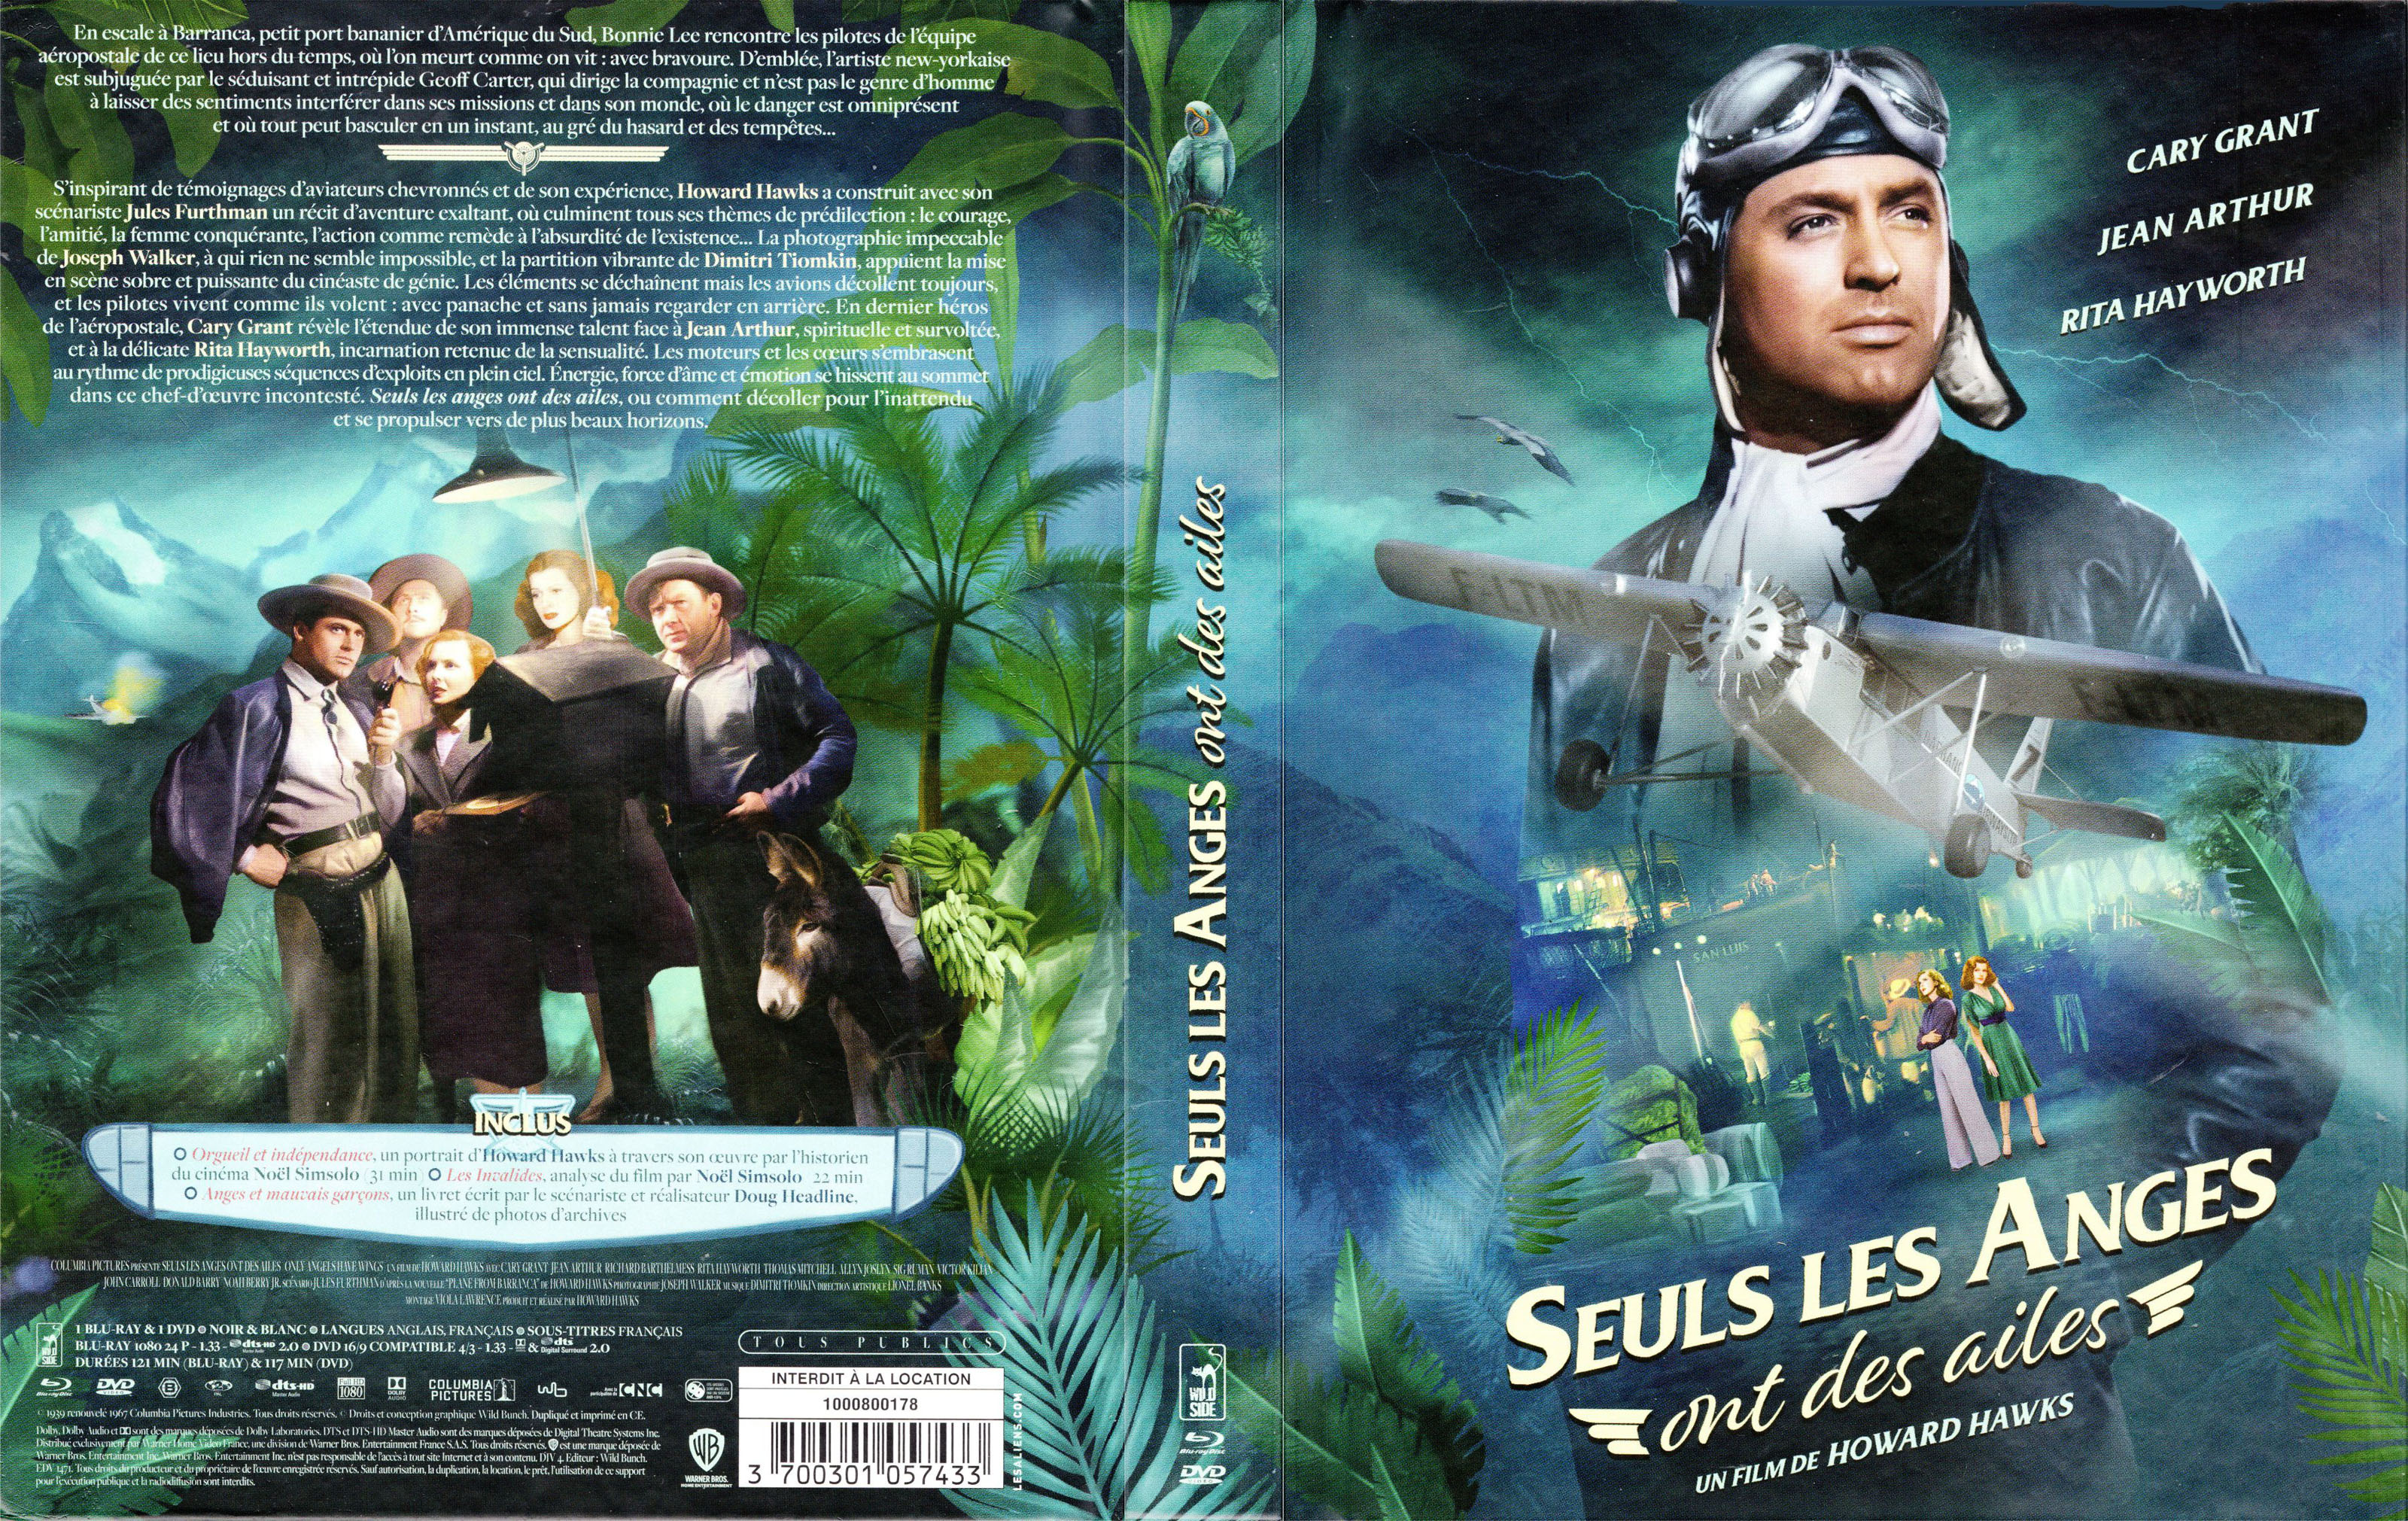 Jaquette DVD Seuls les anges ont des ailes (BLU-RAY)